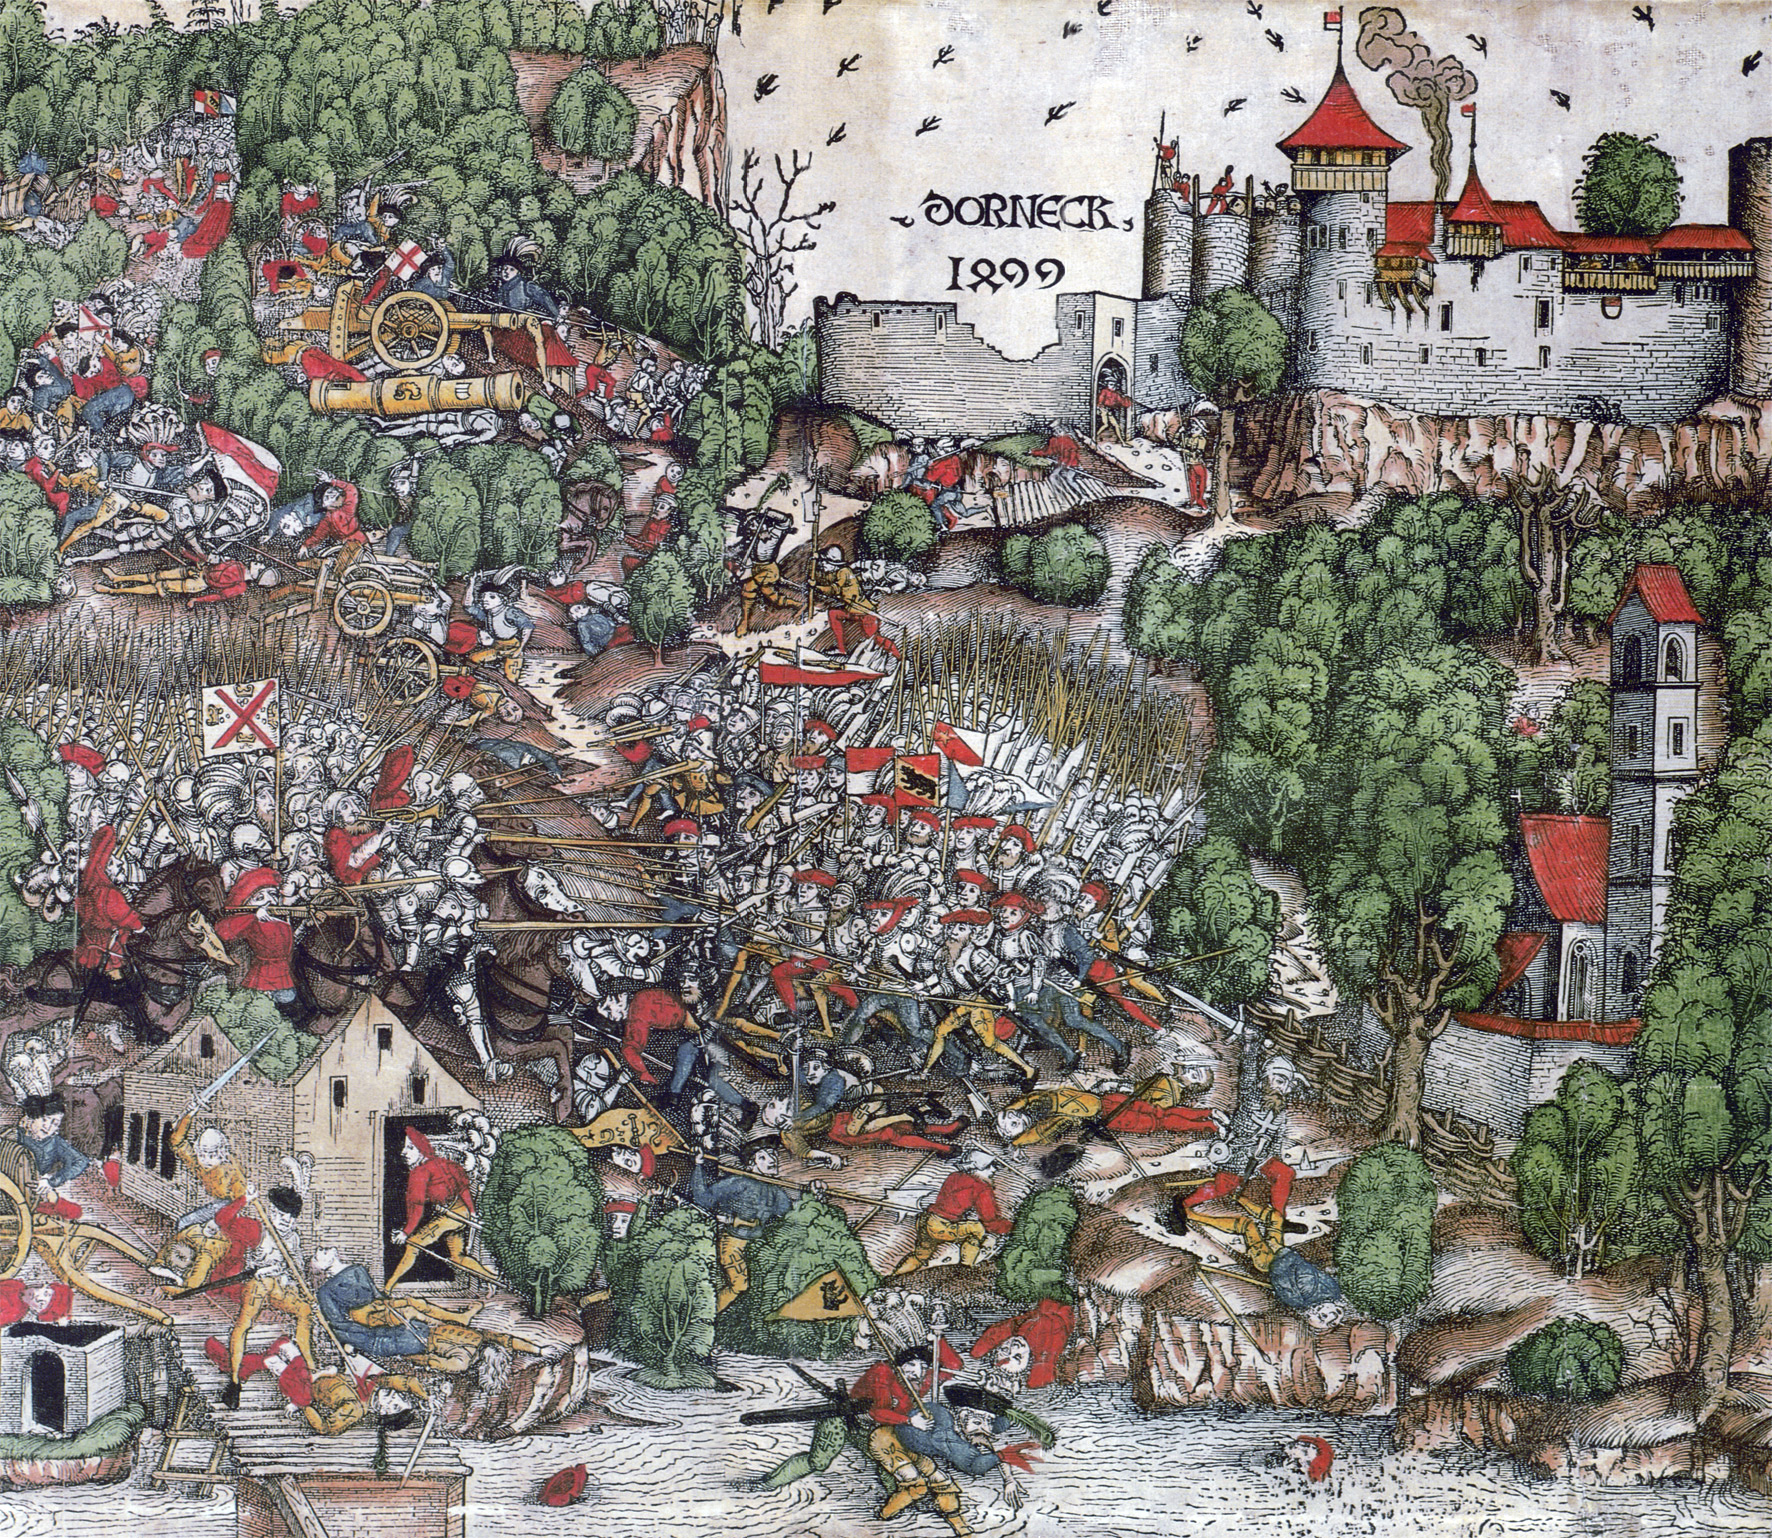 Battle of Dornach – The Swiss Confederacy decisively defeat the Imperial army of Emperor Maximilian I